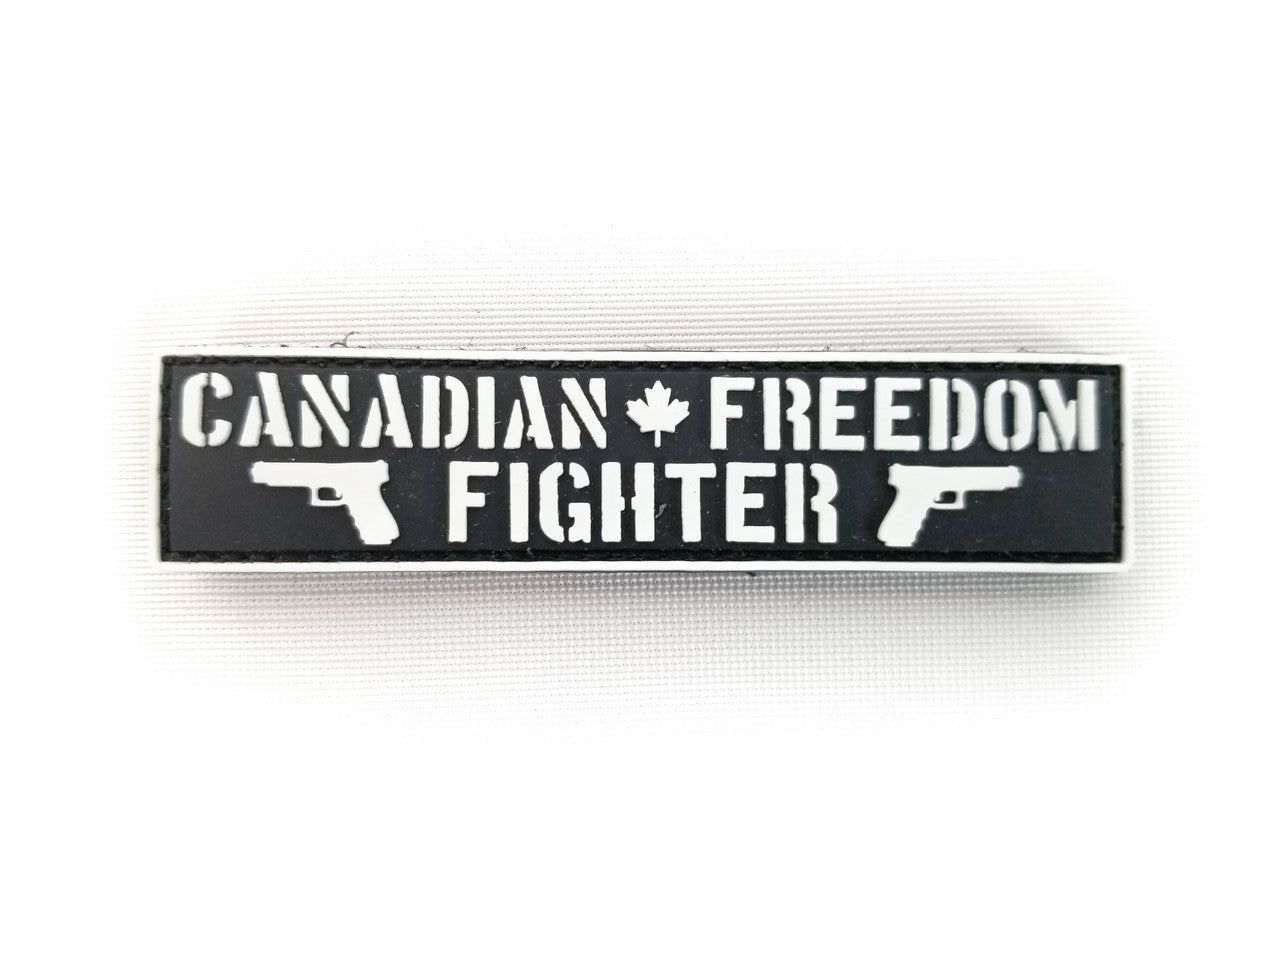 TIC Patch - CANADIAN FREEDOM FIGHTER